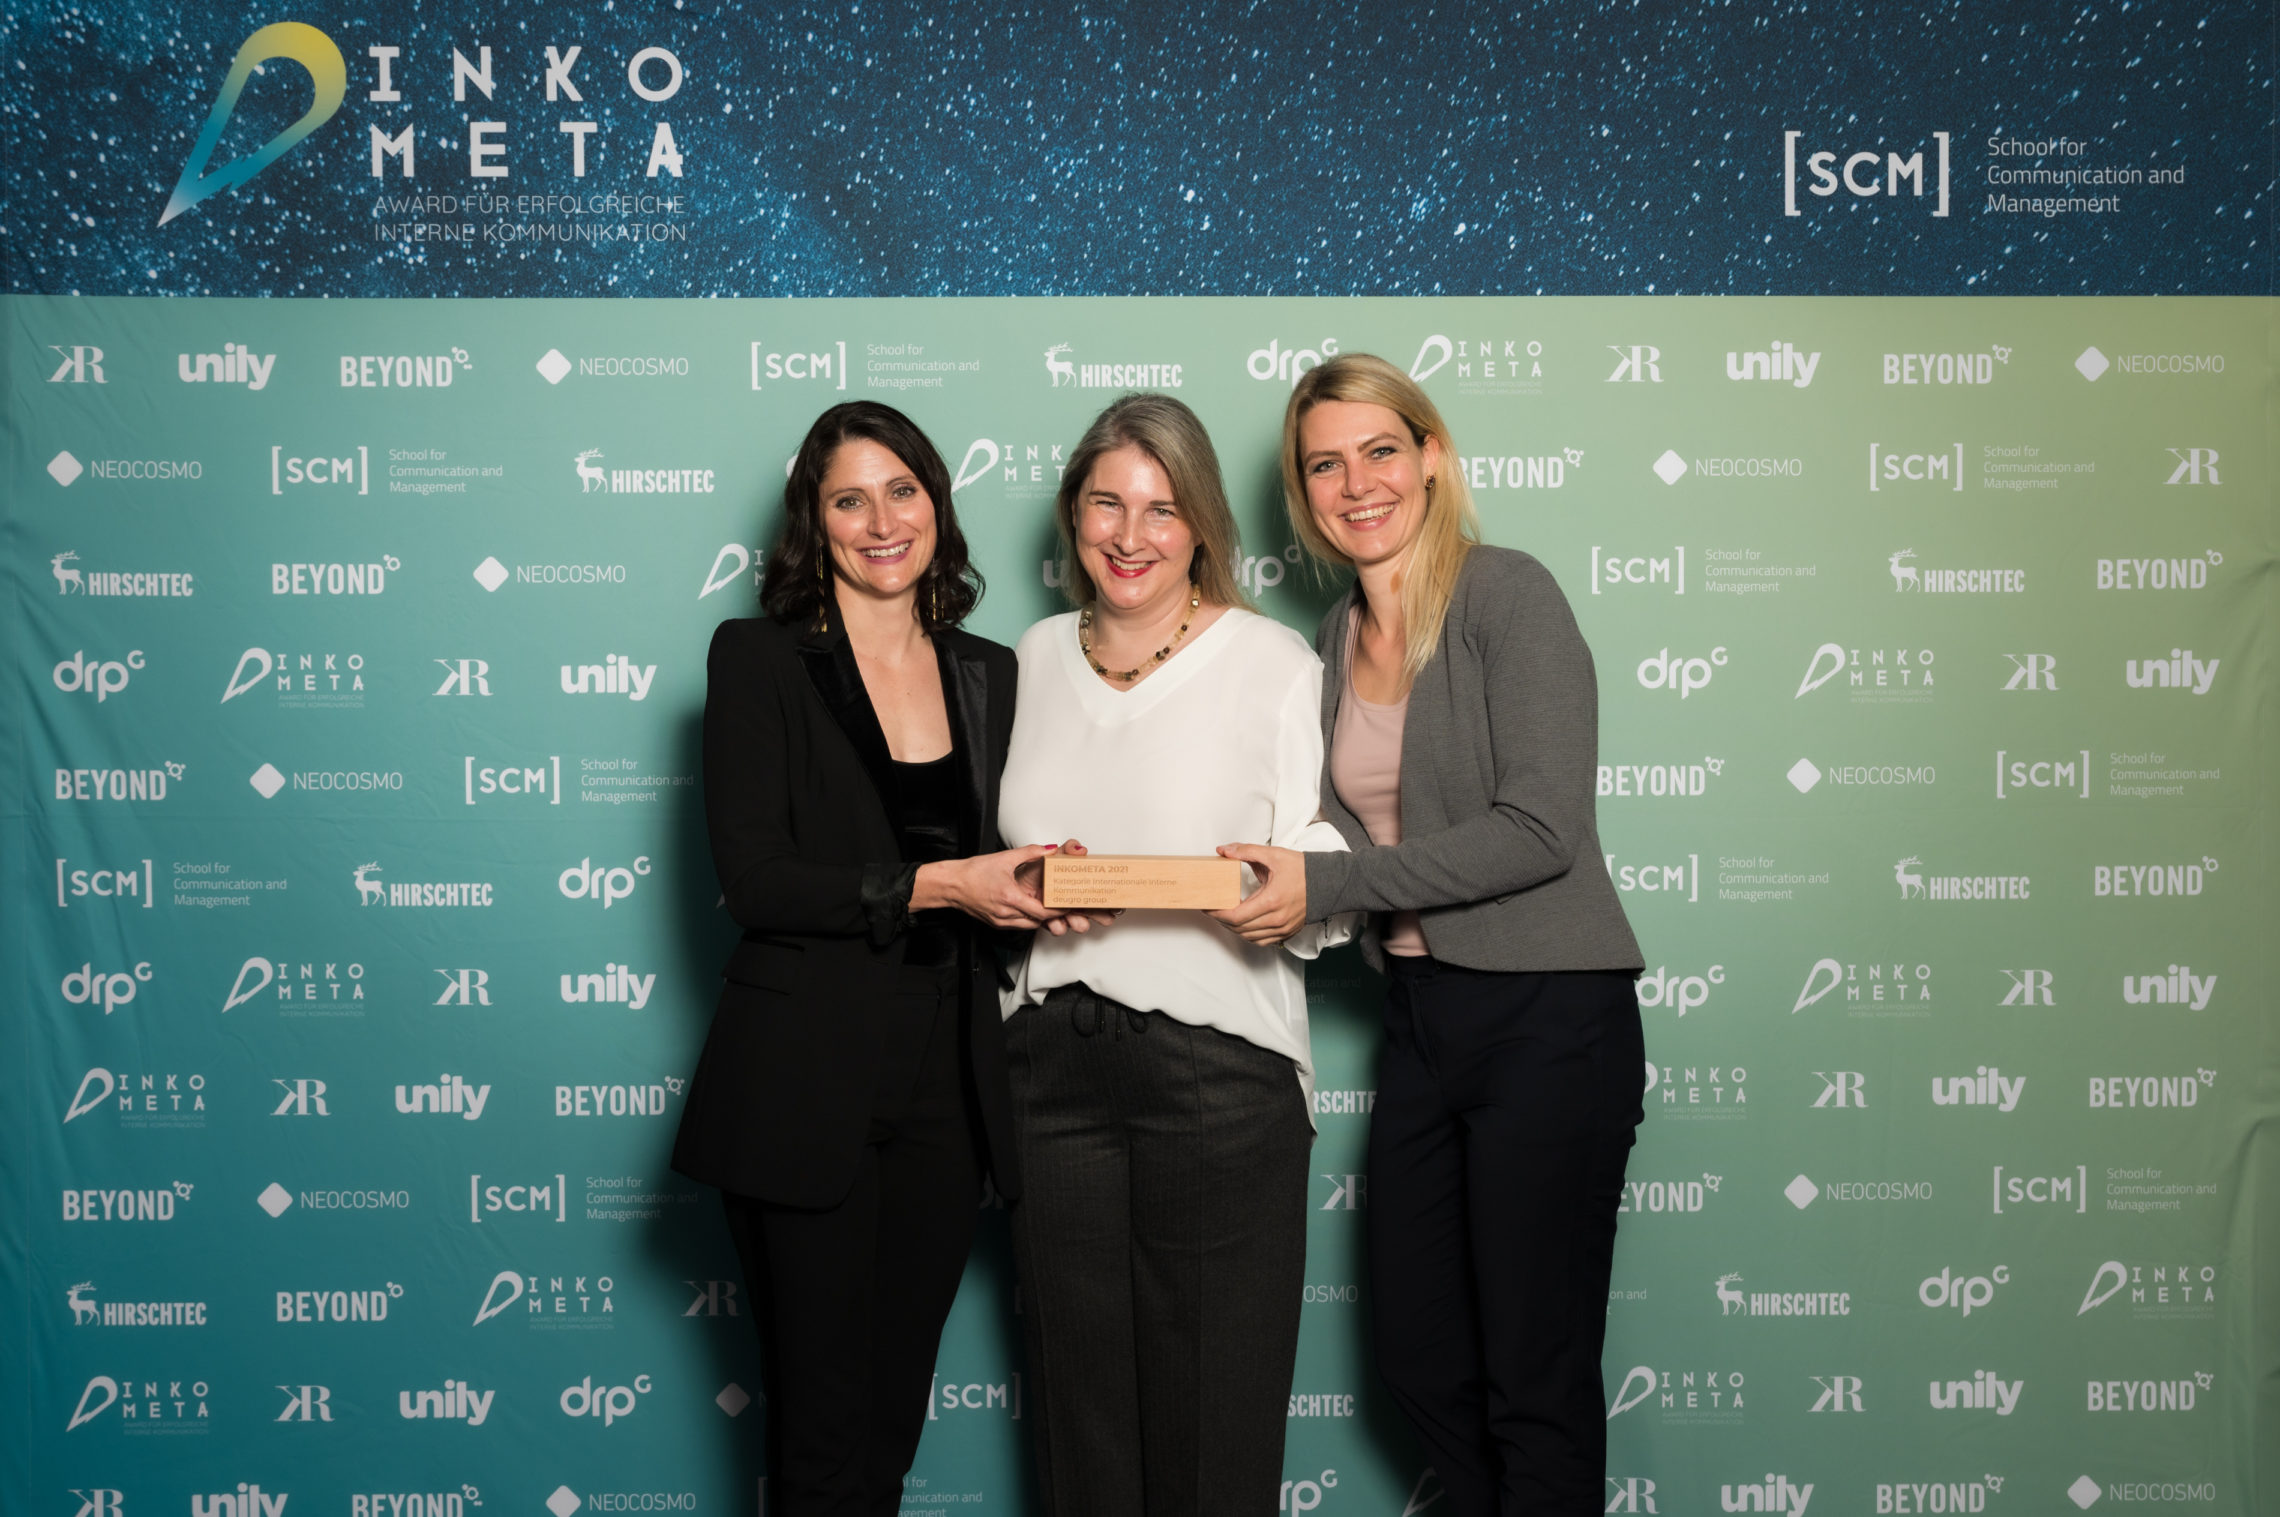 From left to right: Kathrin Planiczky, KP Kommunikationsberatung, Pamela Wilczek, Director Global Marketing, Communications and Strategy, Corporate Communication and Marketing, deugro group, Daniela Thomas, Communications Specialist, Corporate Communication and Marketing, deugro group